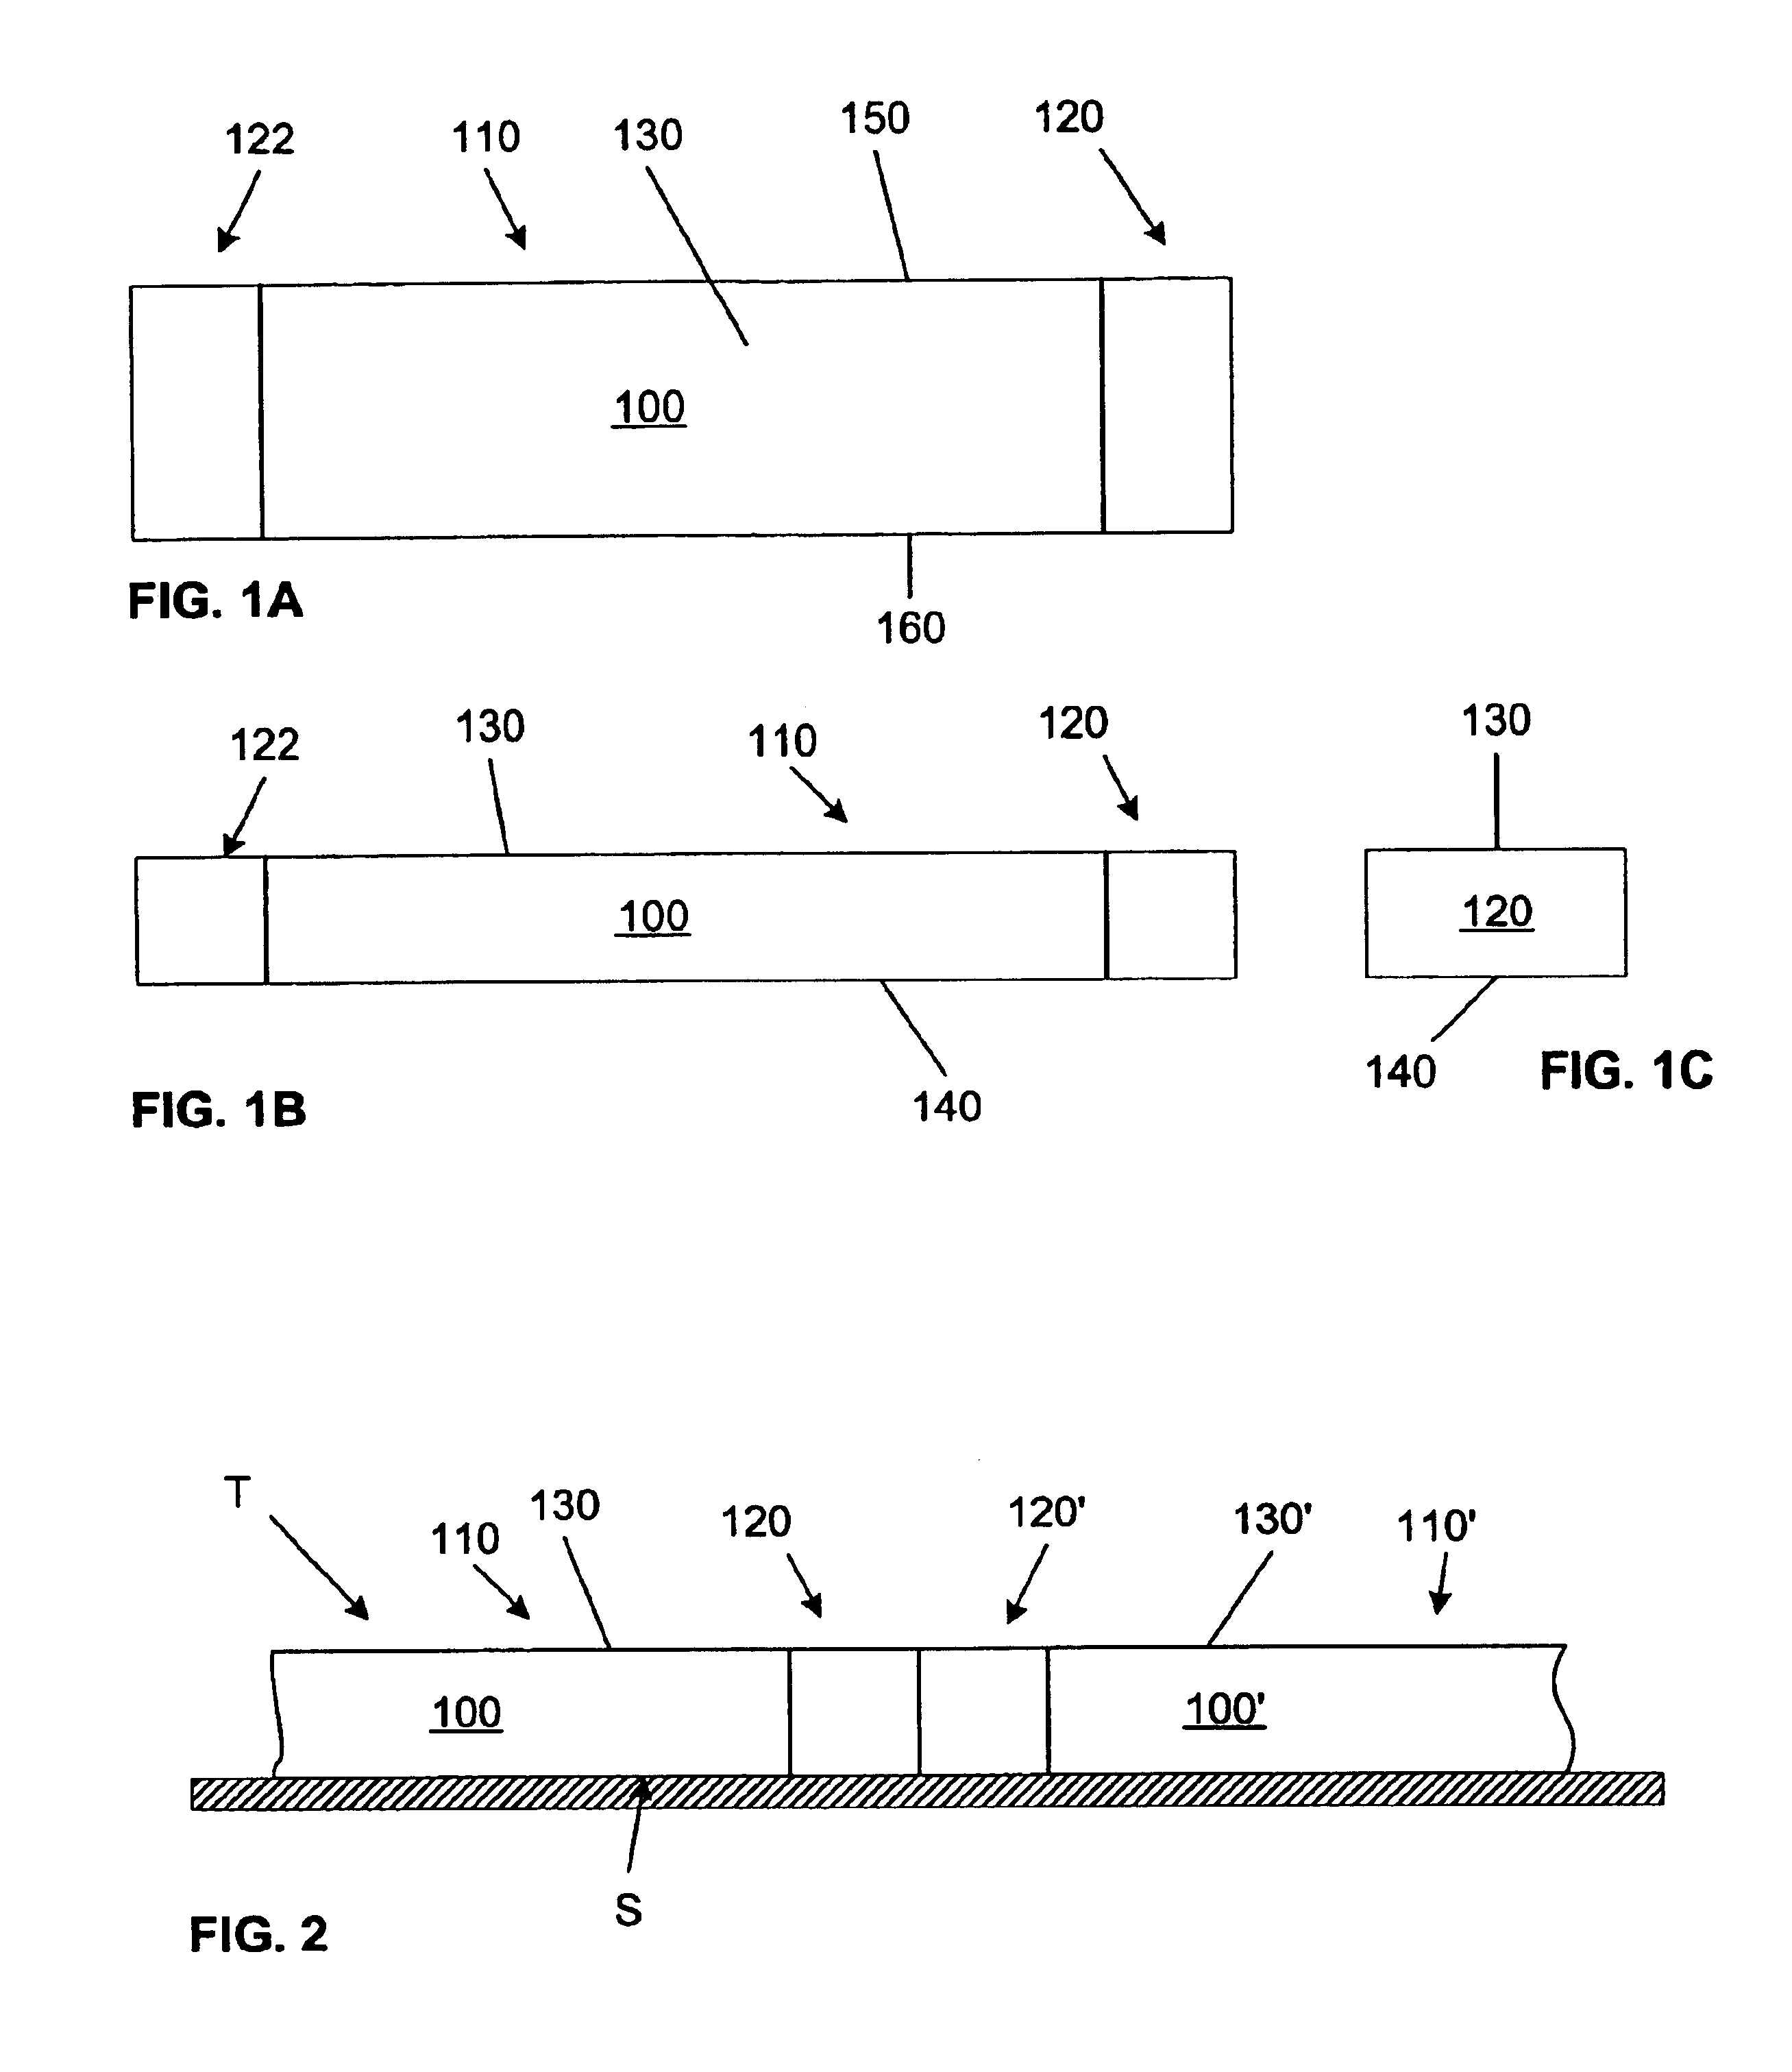 Toy track and method of assembling and disassembling the same